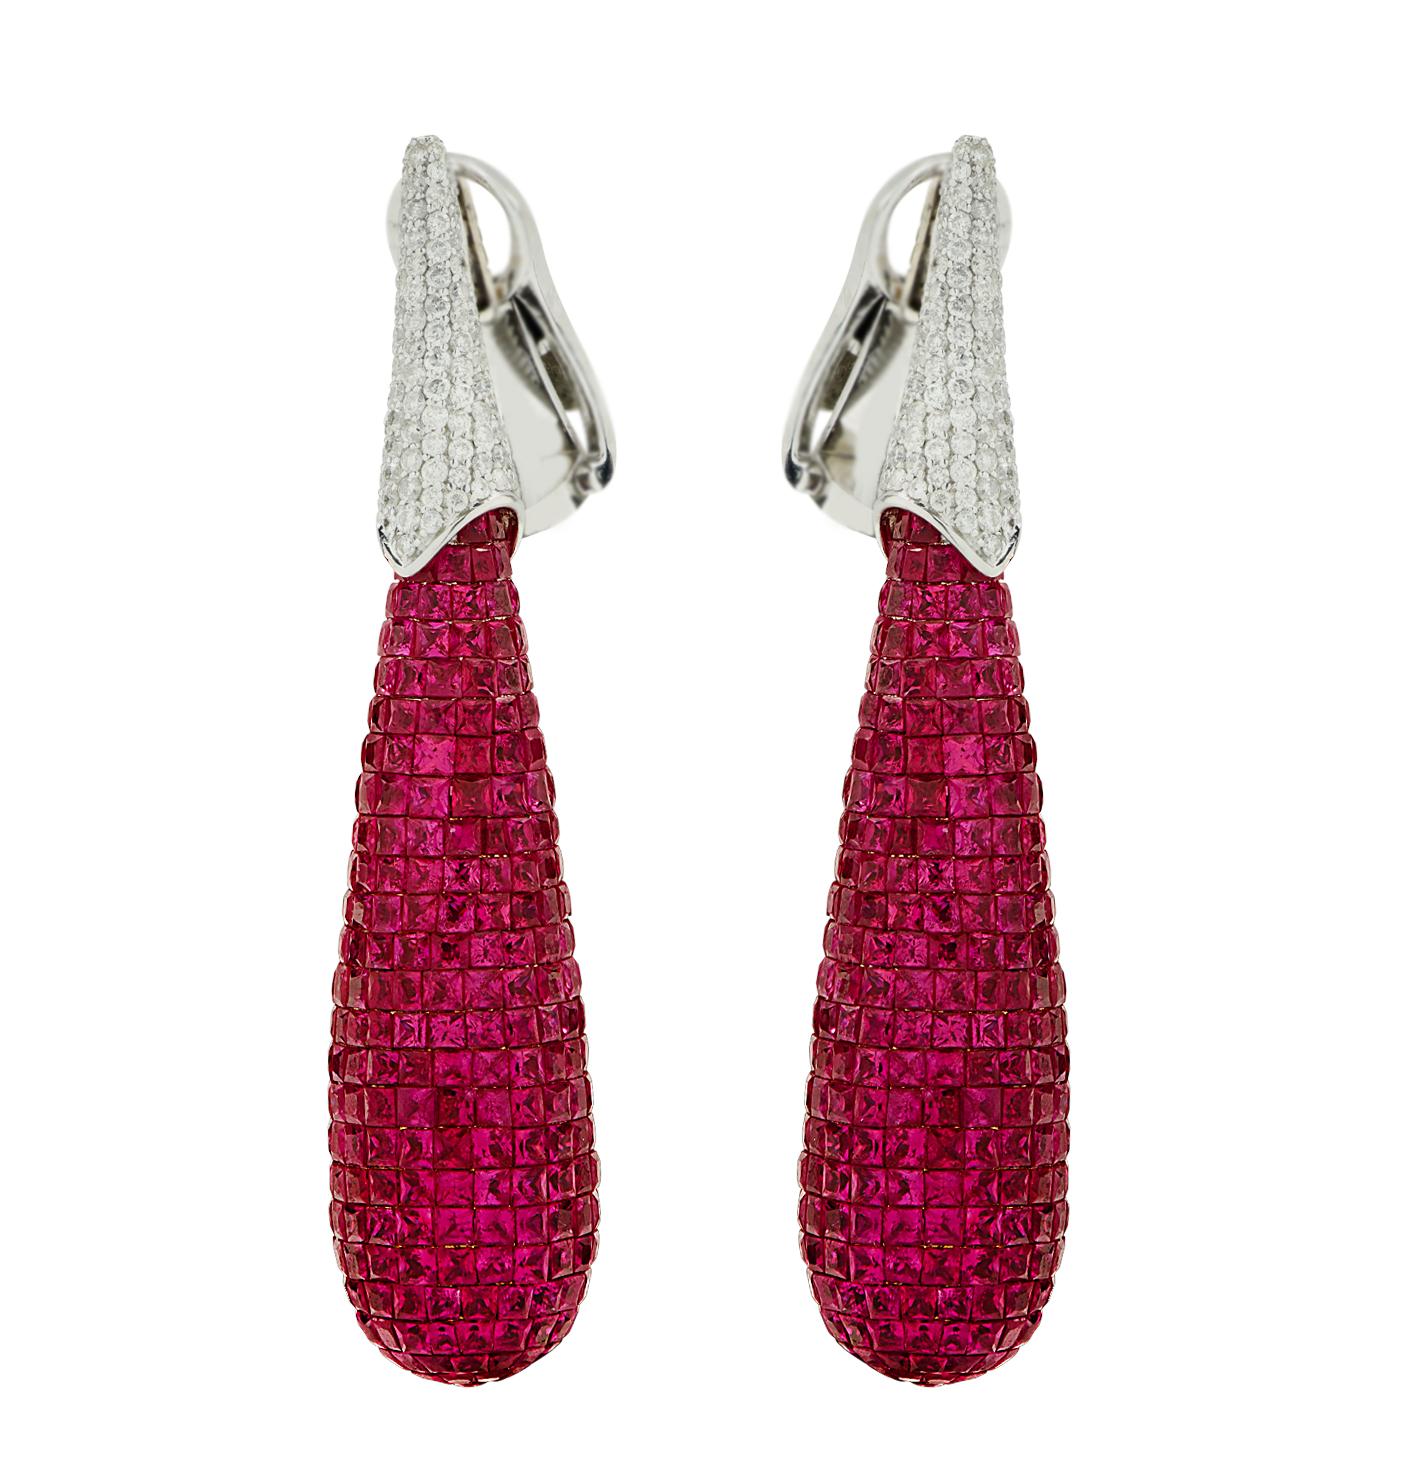 Emerging from the realm of exceptional craftsmanship comes a pair of earrings that epitomize opulence and artistic mastery. Exquisitely forged in the ethereal luminescence of 18k white gold, these earrings are not merely an accessory, but a